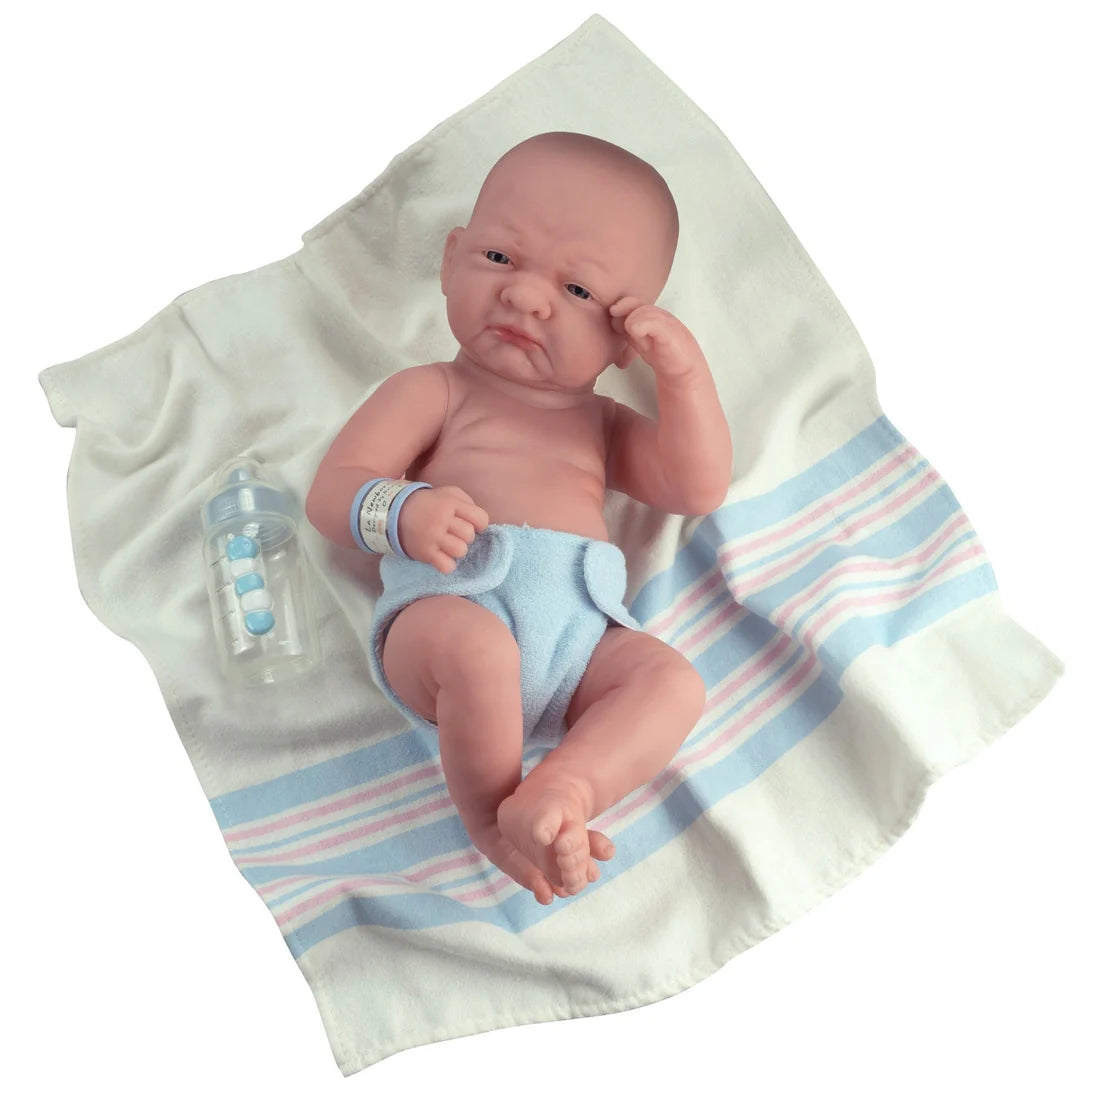 La Newborn Baby Doll &quot;First Day&quot; Real Boy